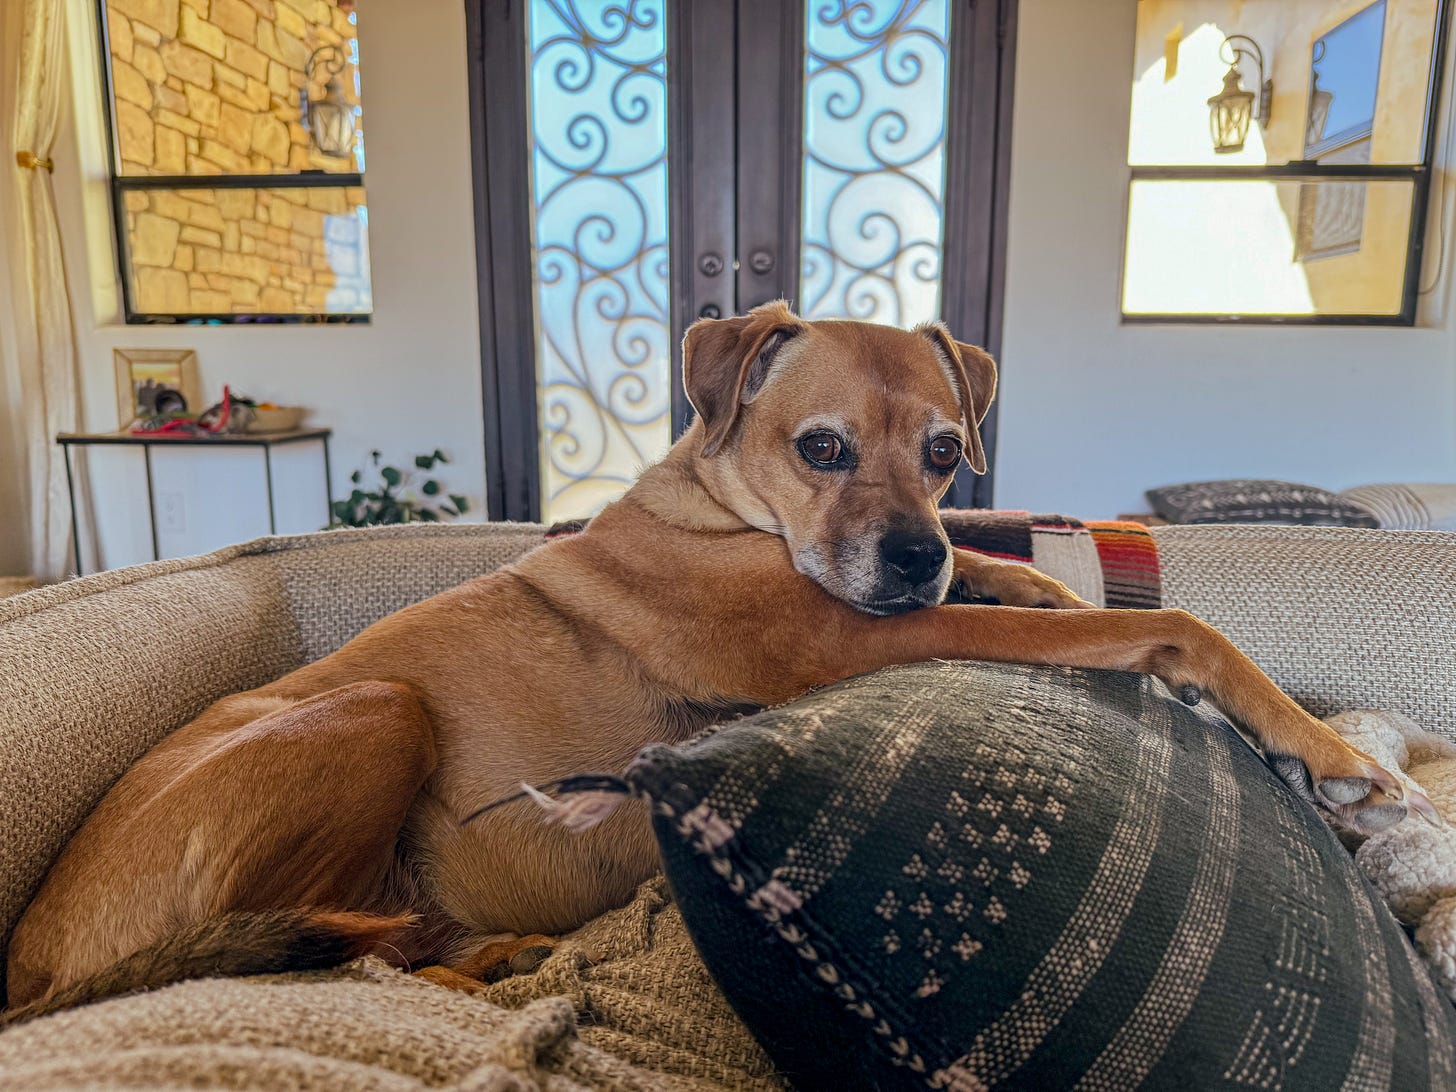 A brown dog lays on couch pillows with his legs outstretched. He is looking at the camera and has some white hair on his muzzle.